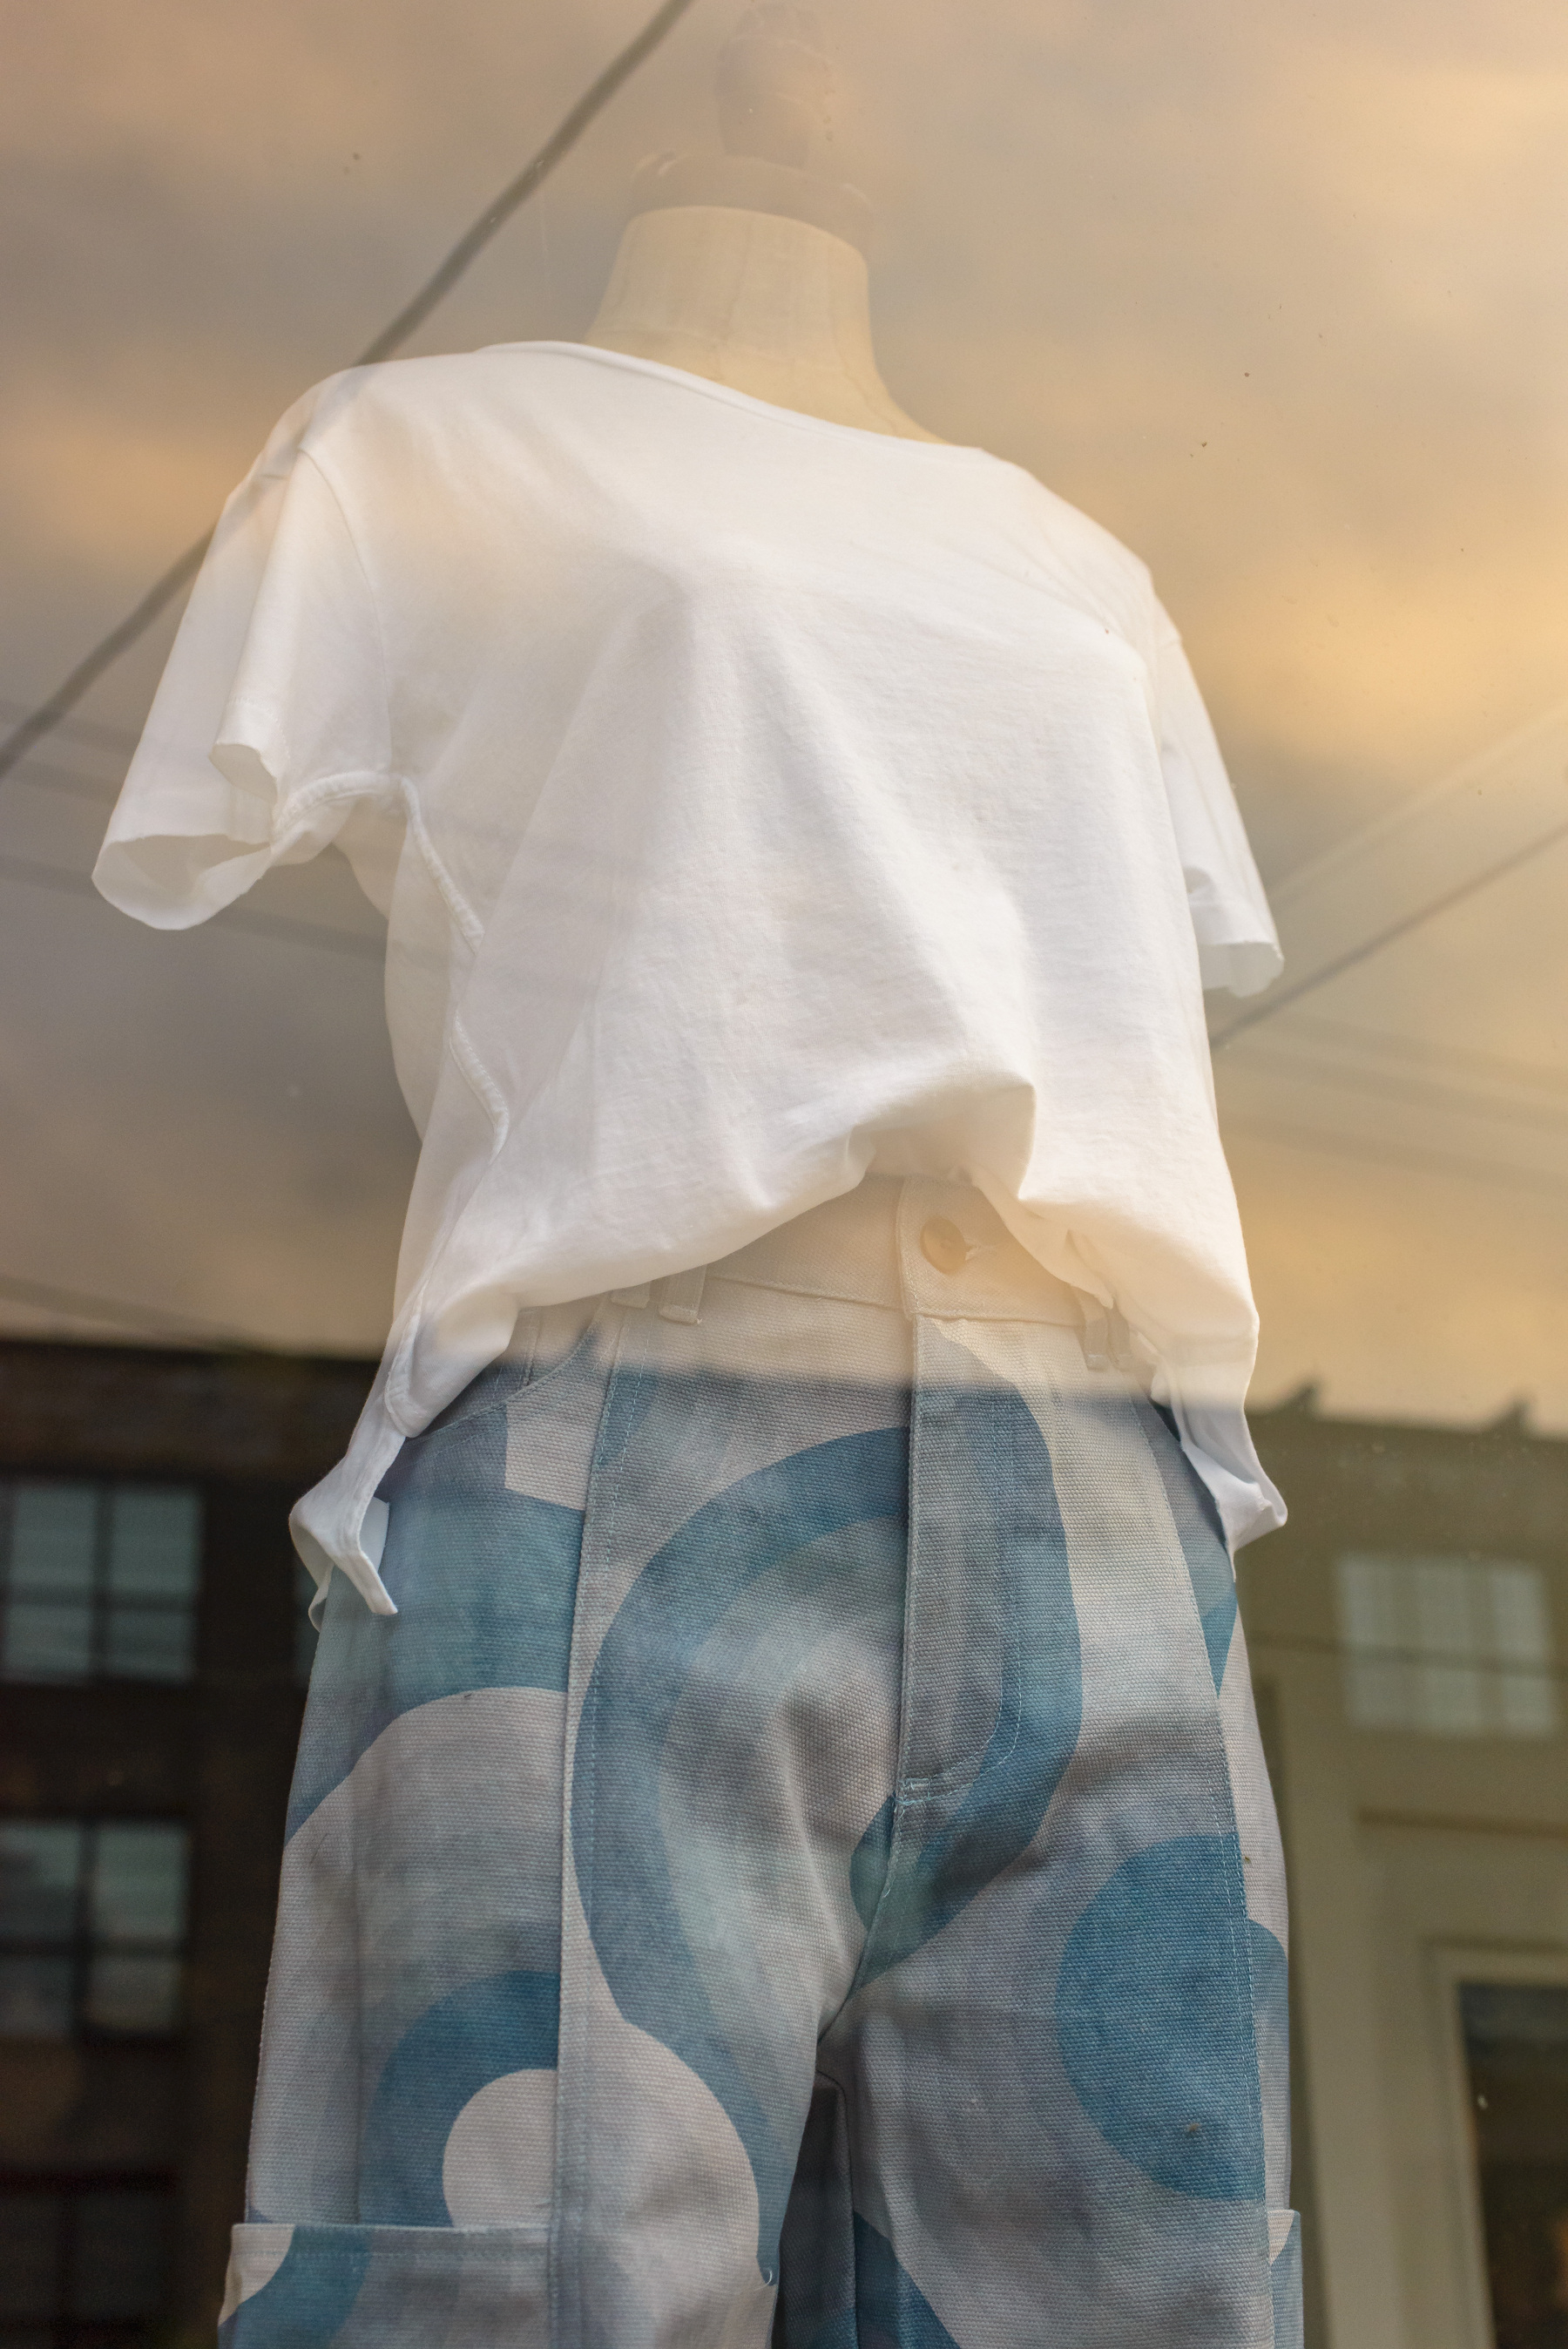 Blouse and pants on a female mannequin in a shop window. Blouse is white cotton knit. Pants are a rainbow circles print with shades of dark to light blue making up the rainbow swirls.